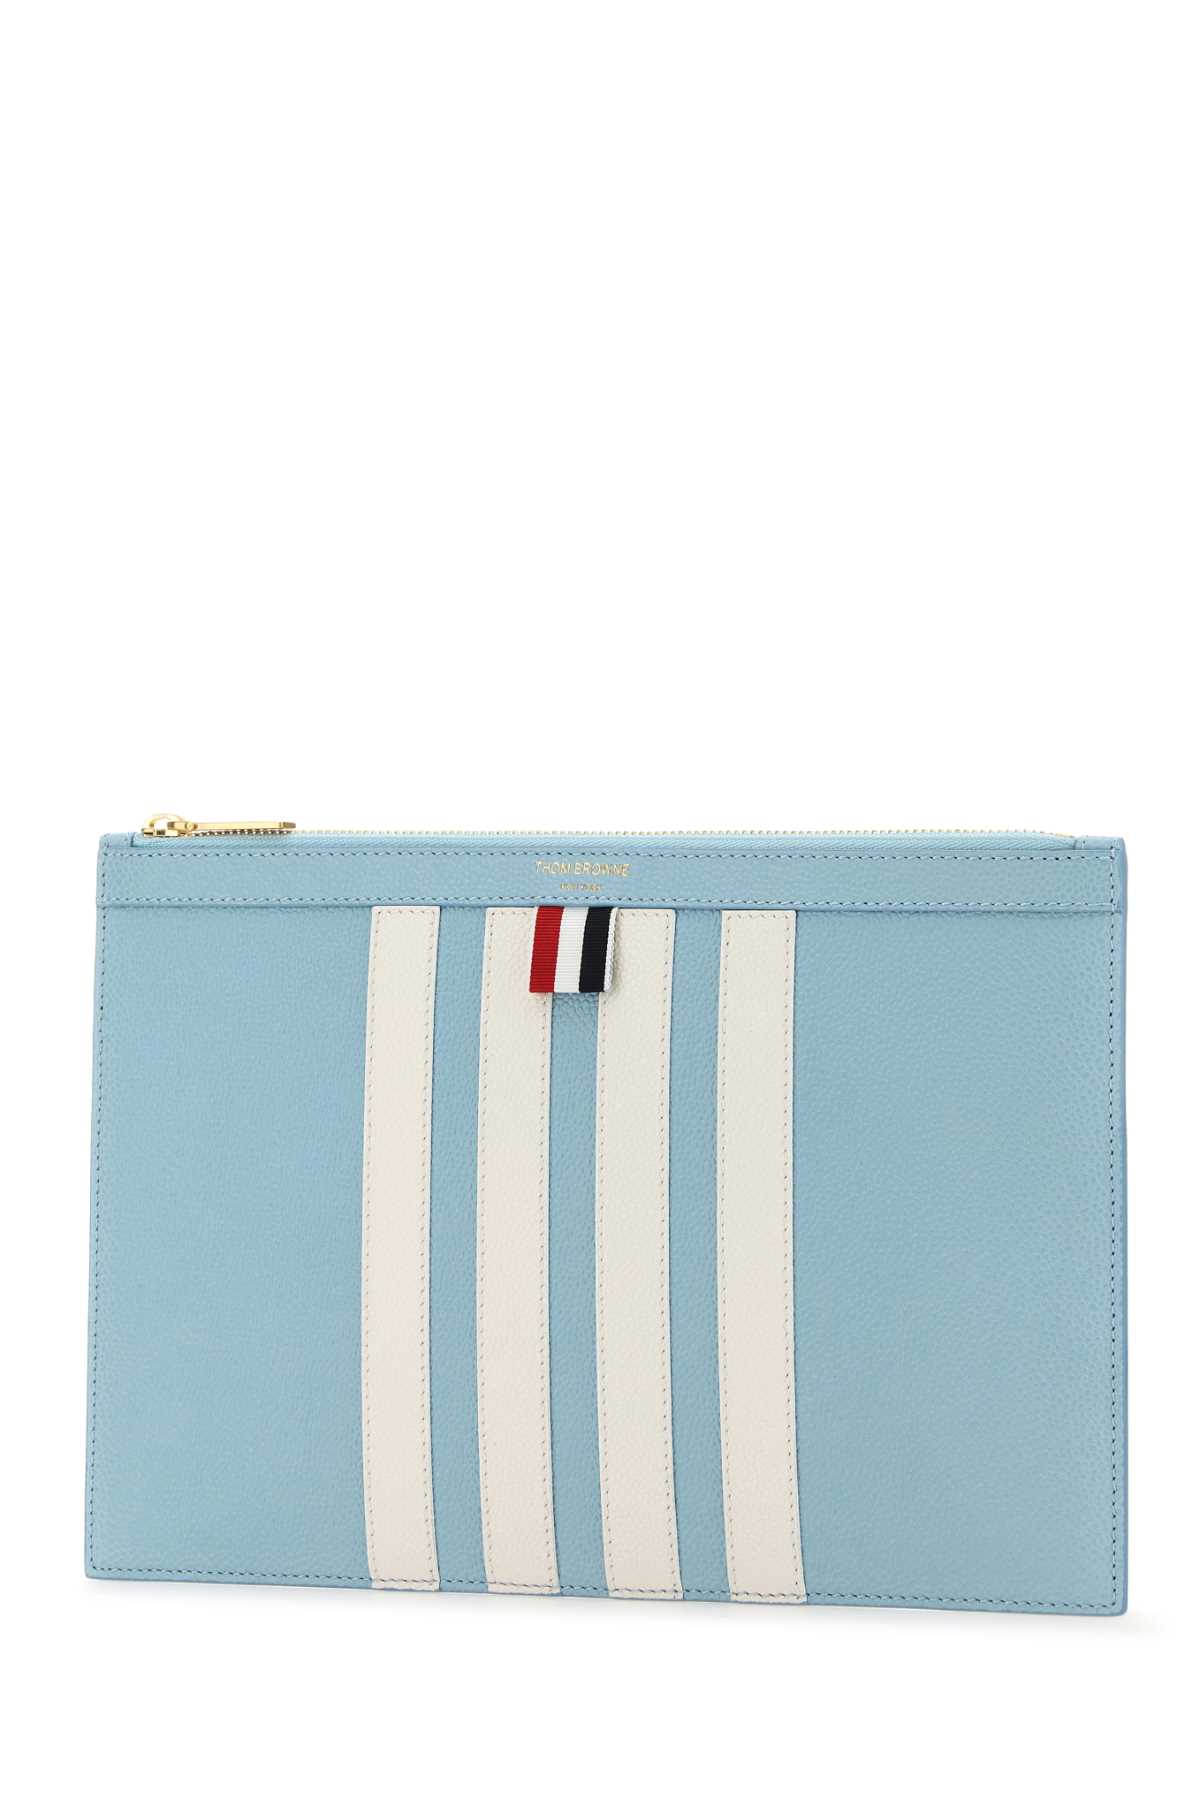 Thom Browne Pastel Light Blue Leather Clutch In Blue1